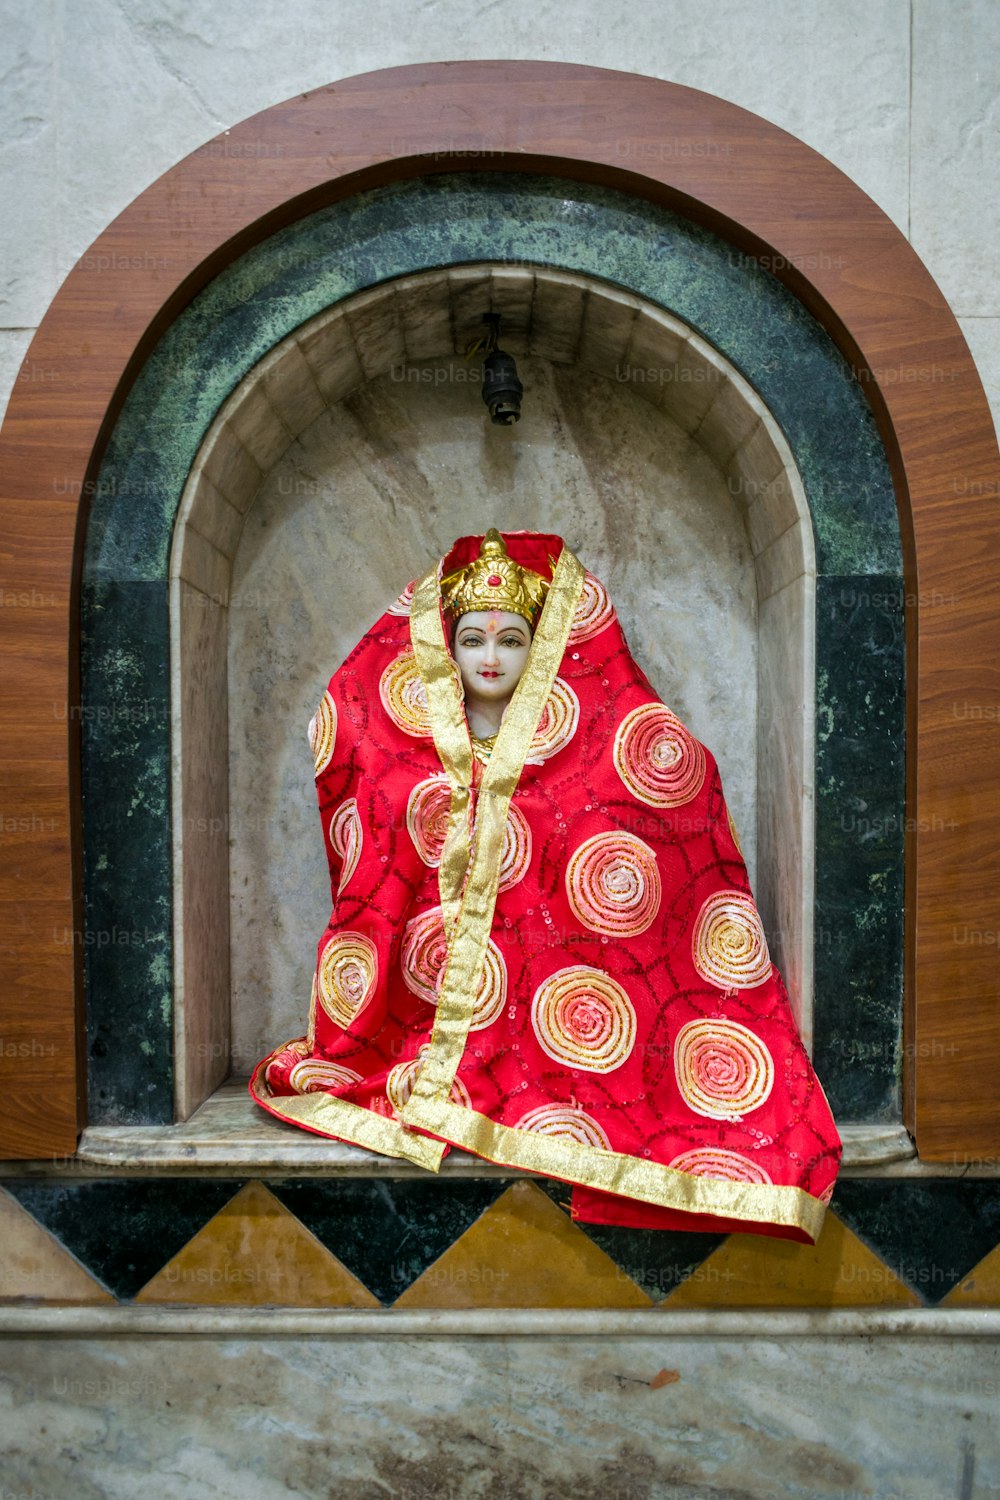 a statue of a woman dressed in a red and gold costume